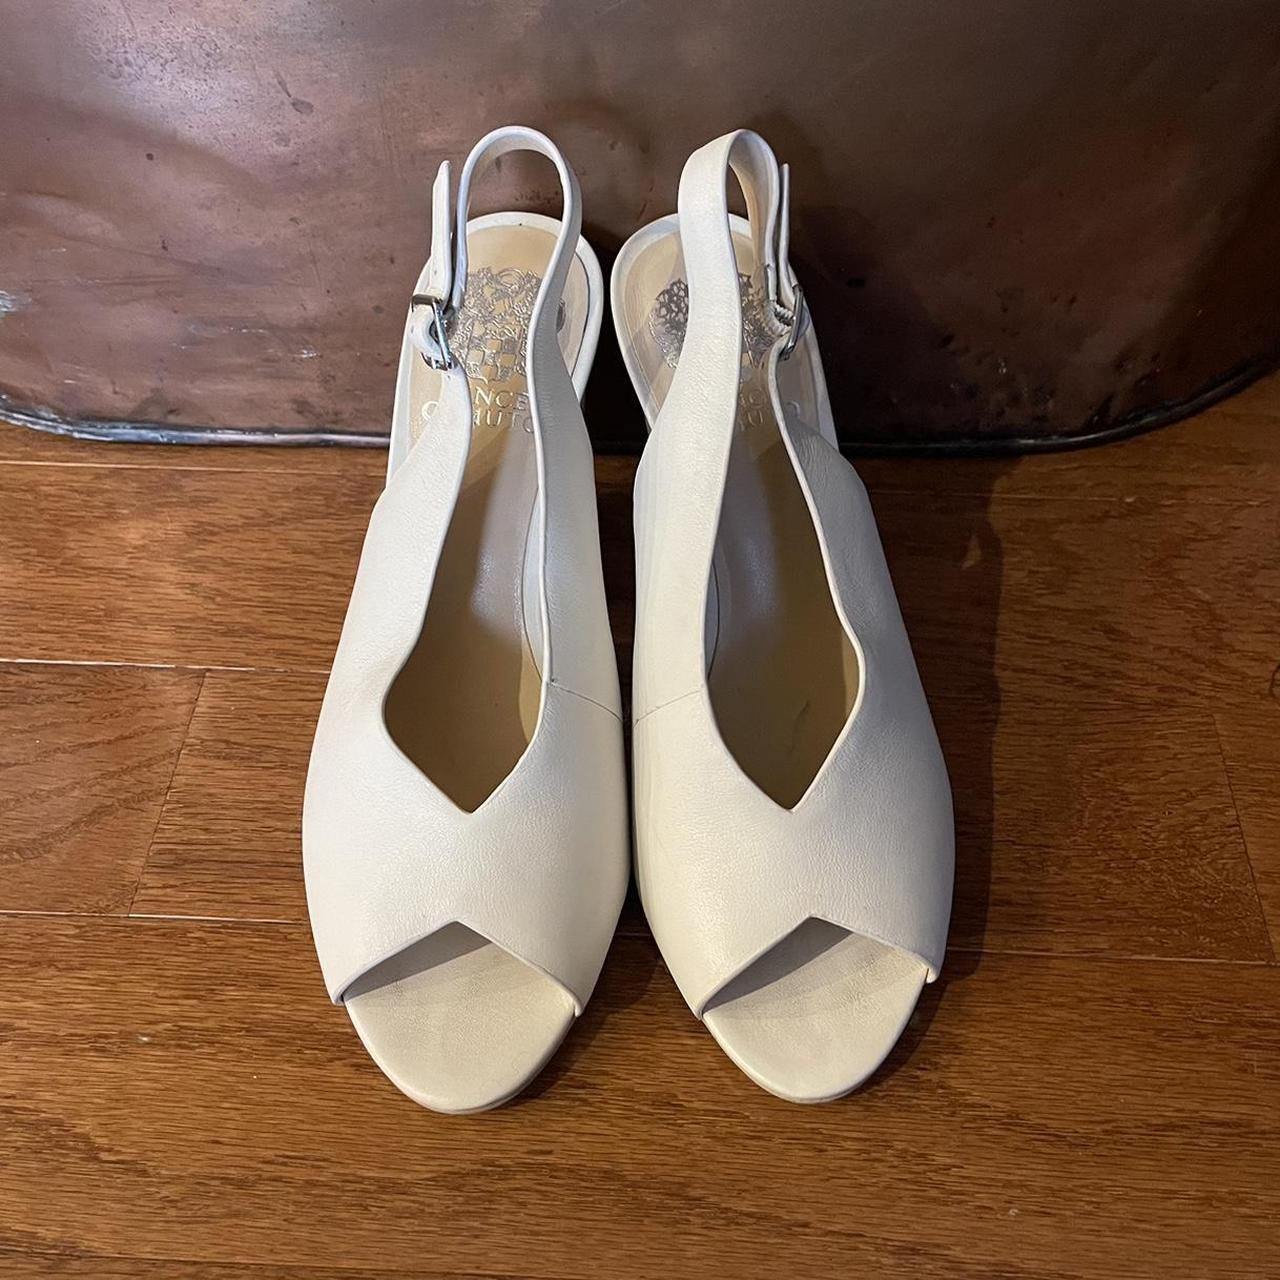 Vince Camuto Women's Cream Courts (2)